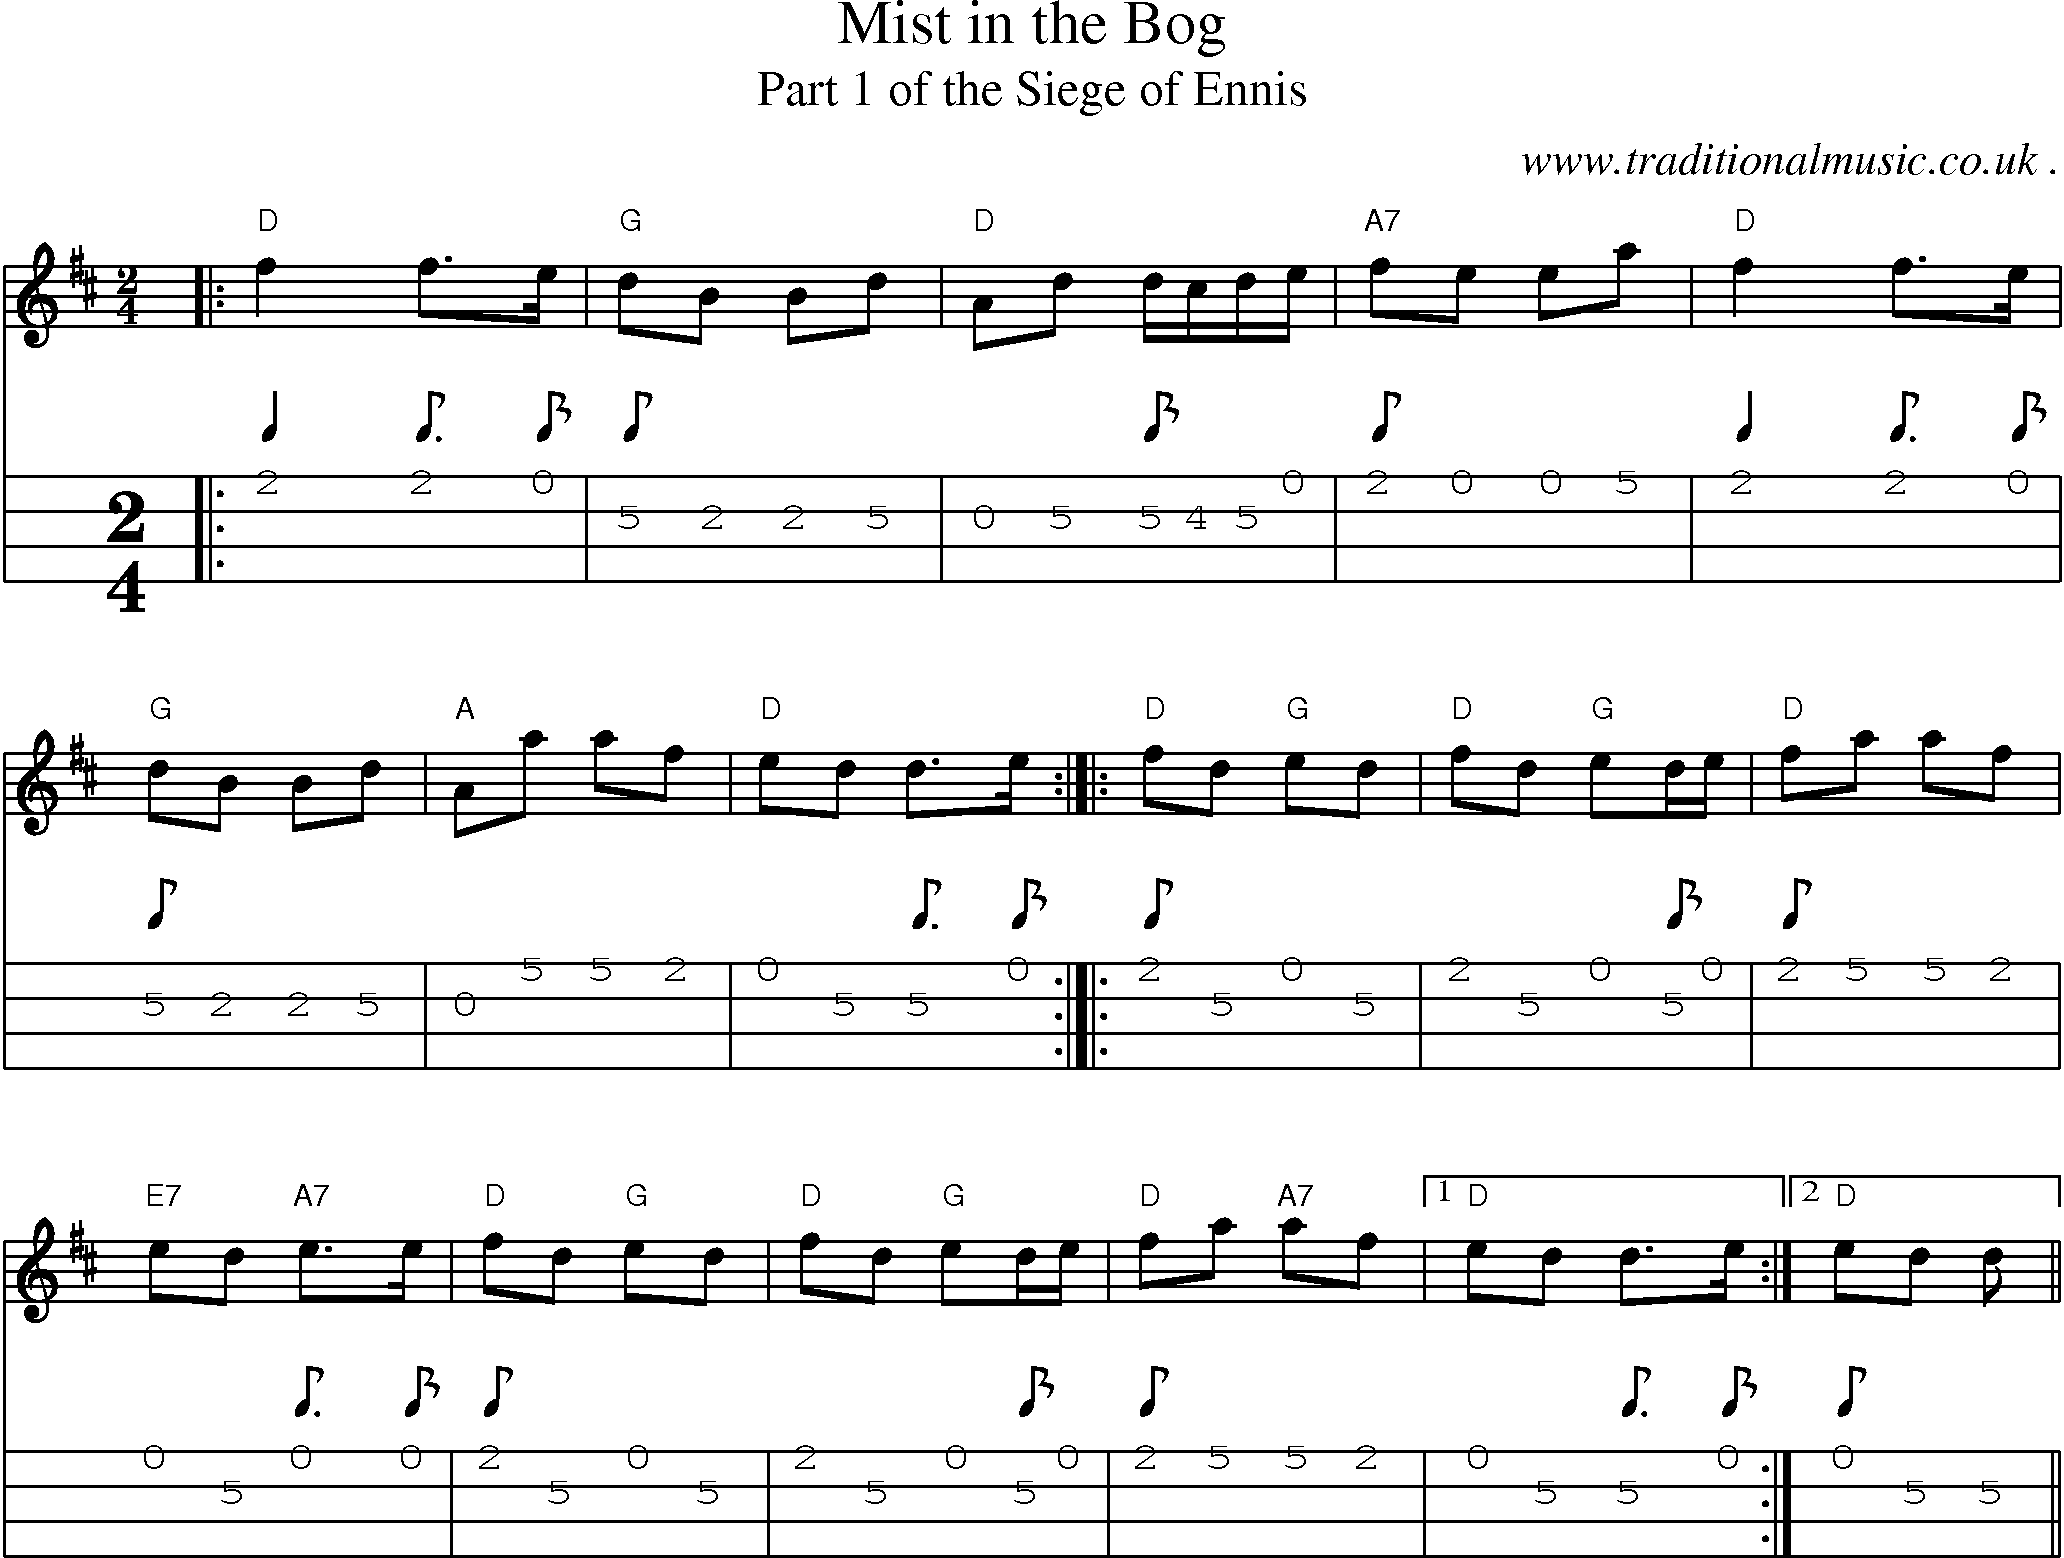 Music Score and Guitar Tabs for Mist In The Bog